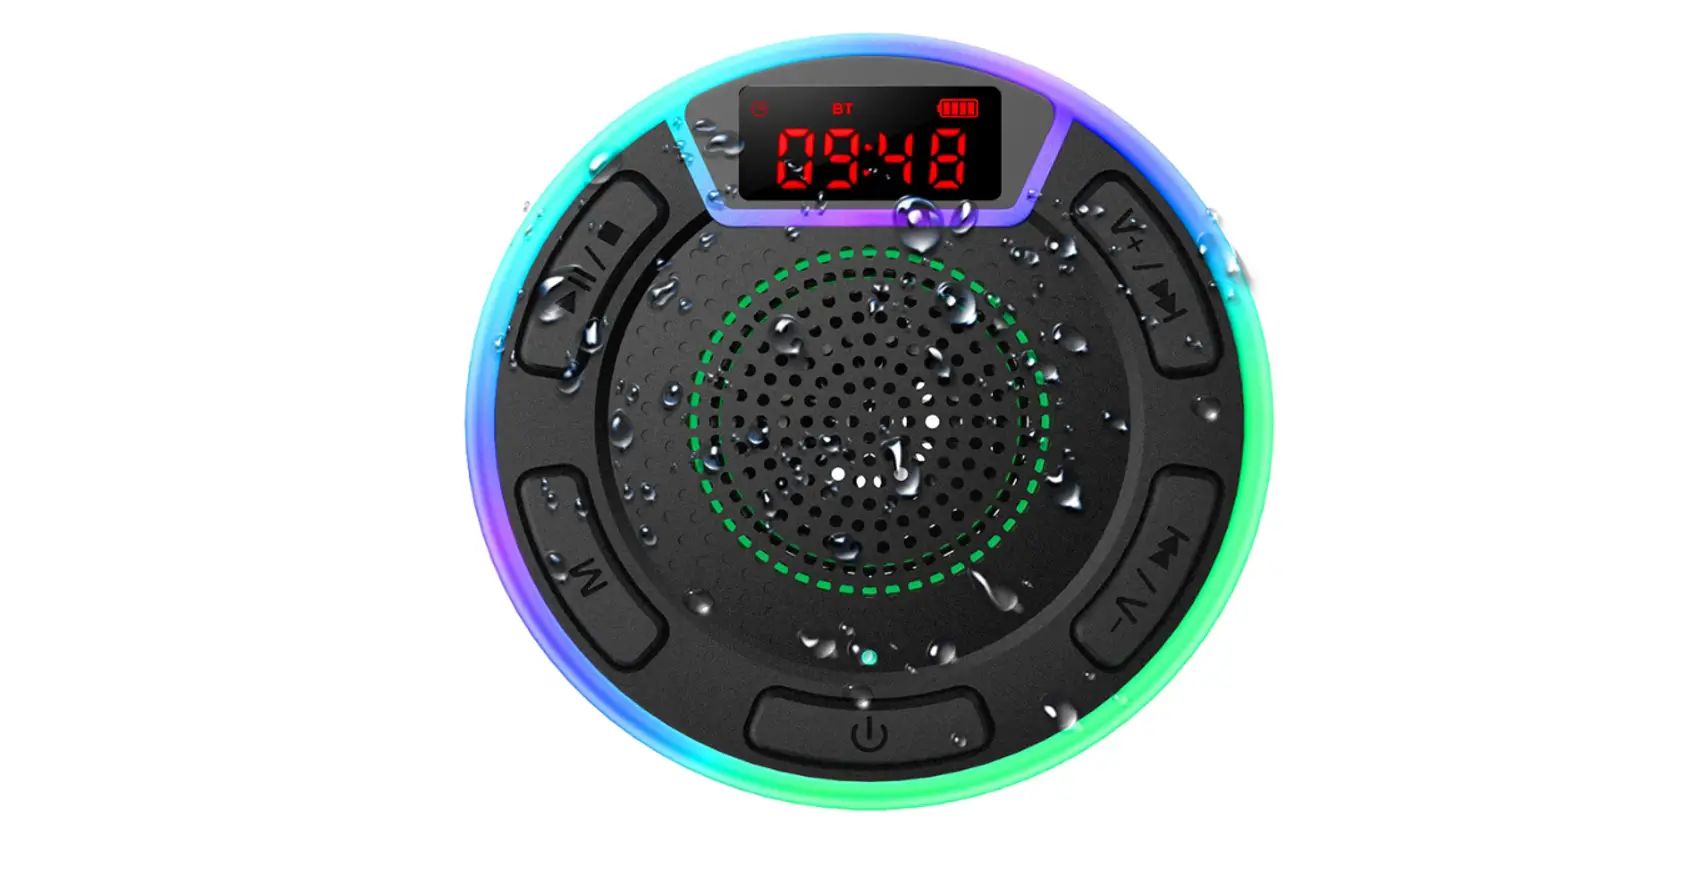 Connecting Your Phone To Ontek Waterproof Speaker: A Quick Setup Guide